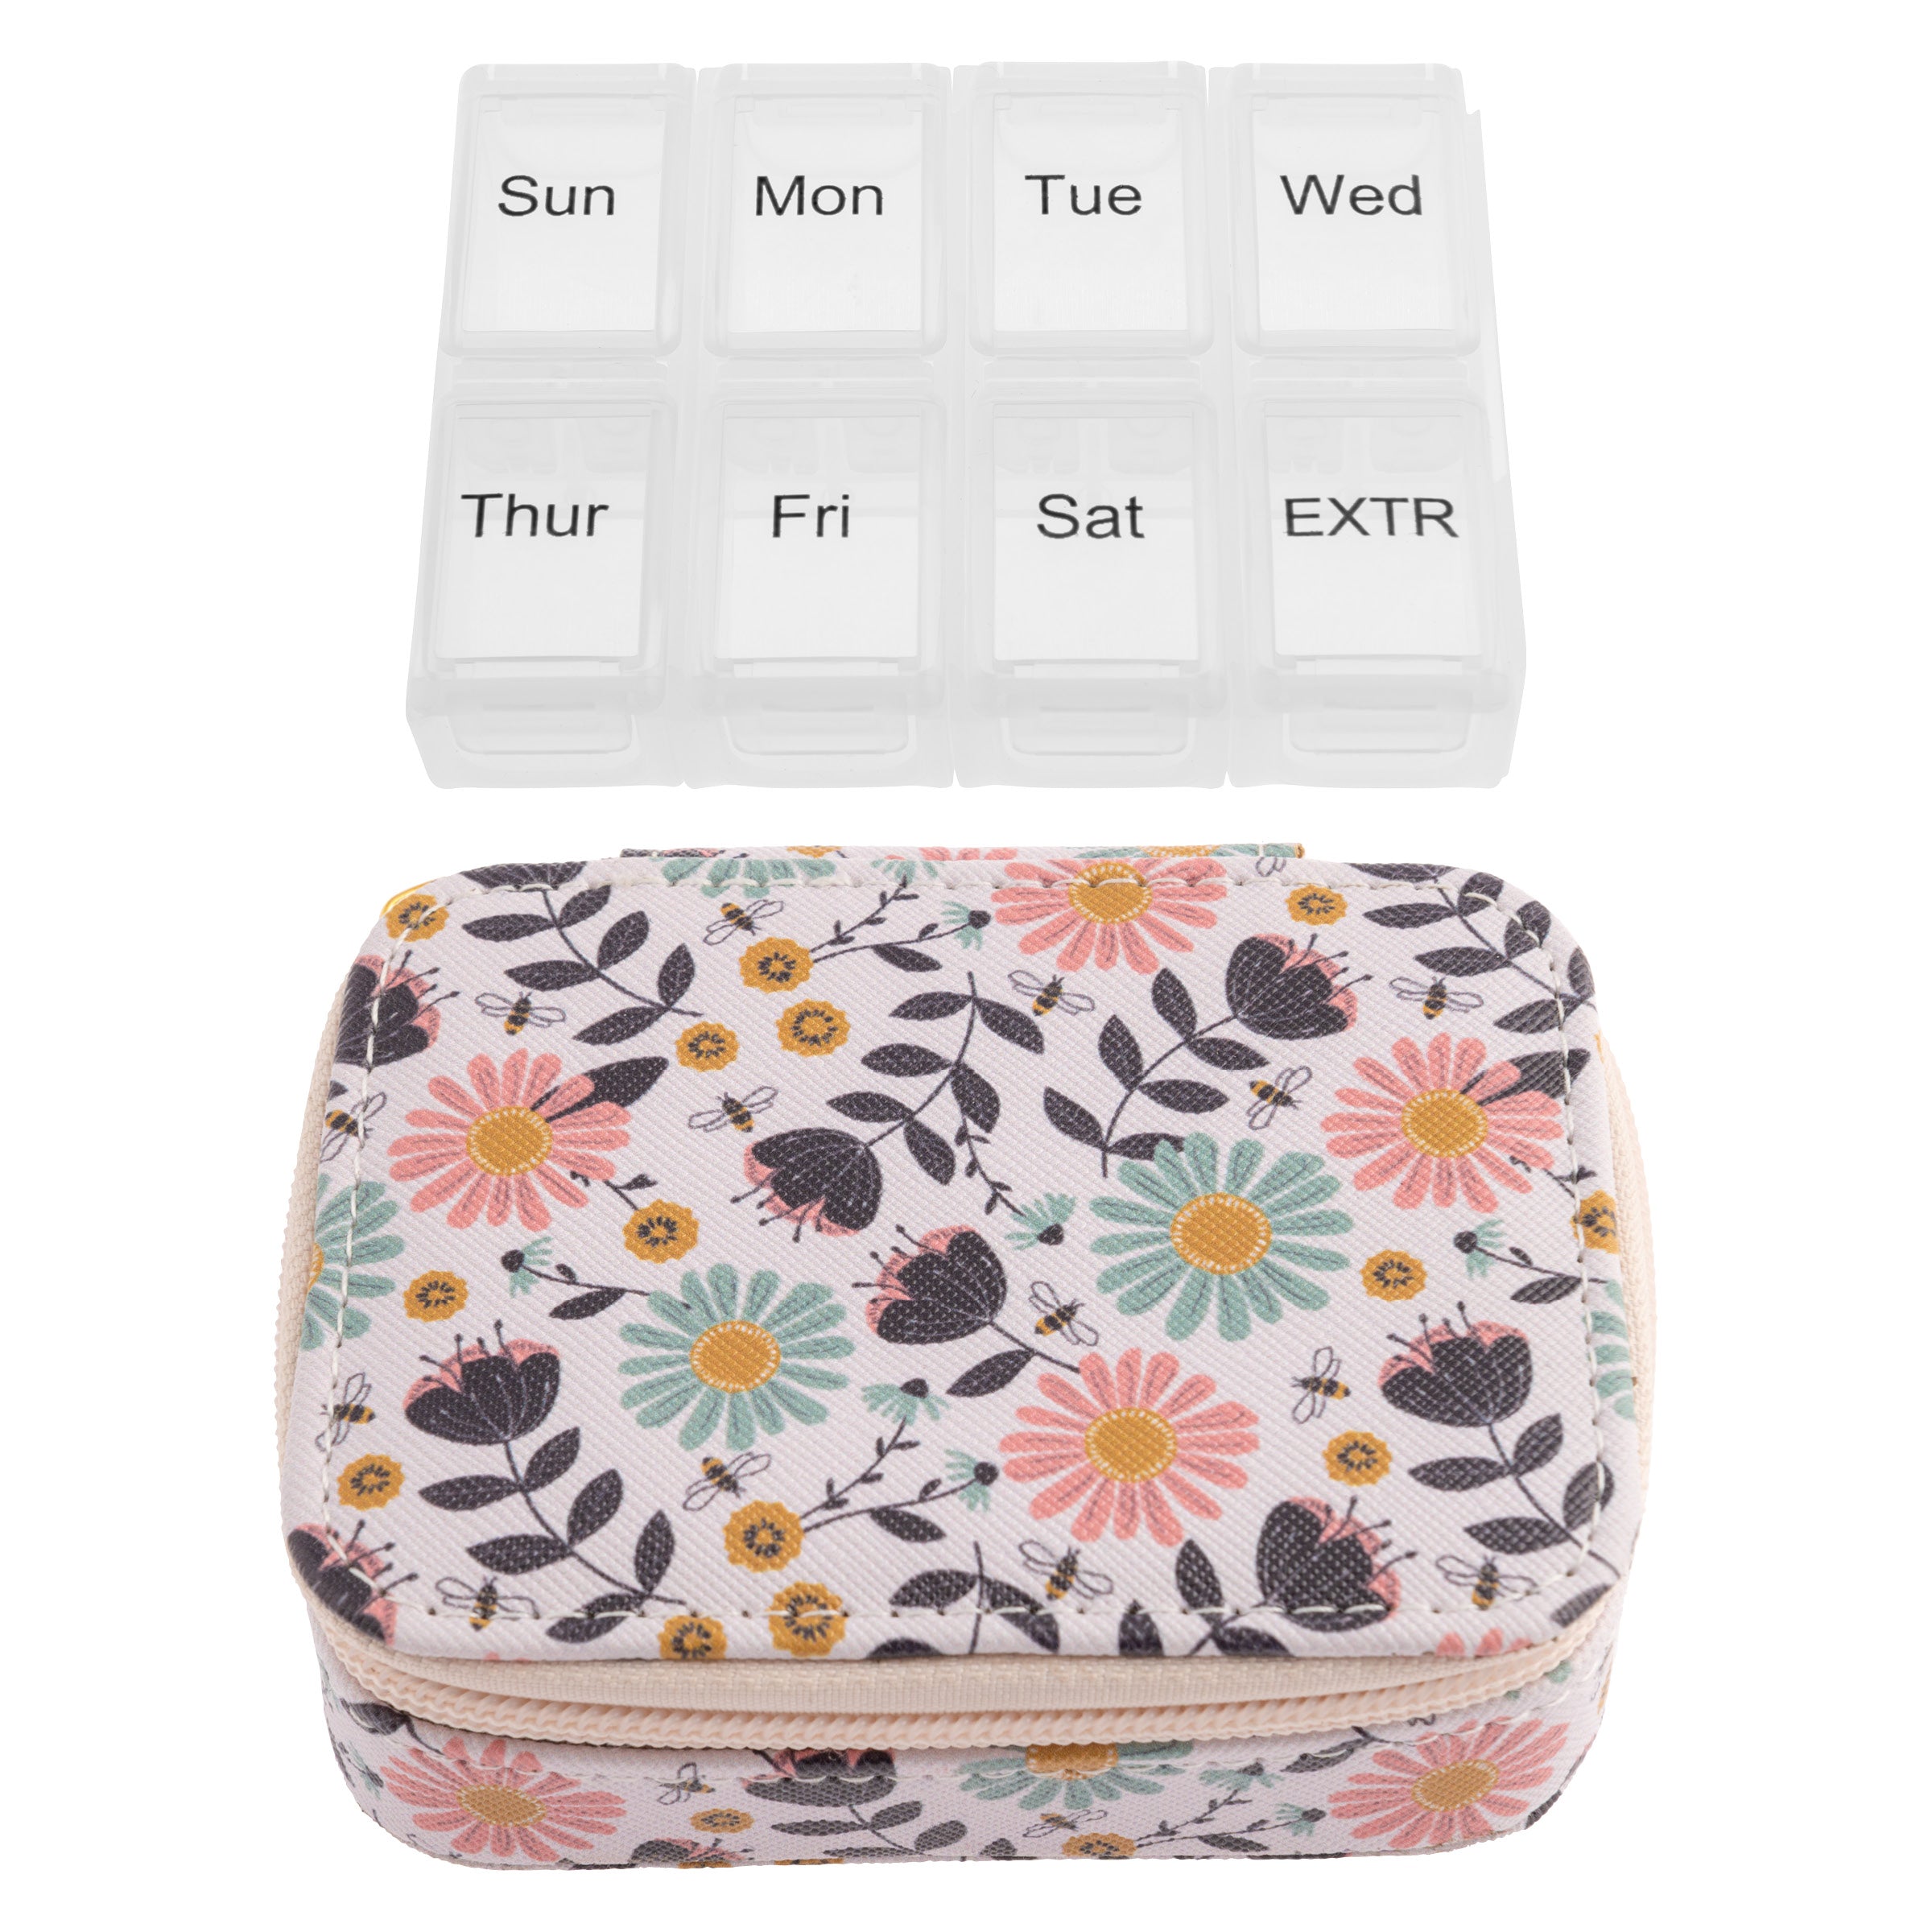 8 Grids Travel Pill Organizer Moisture Proof Pills Box For Pocket Purse  Daily Pill Case Portable Medicine Vitamin Holder Container From Prettyrose,  $2.46 | DHgate.Com